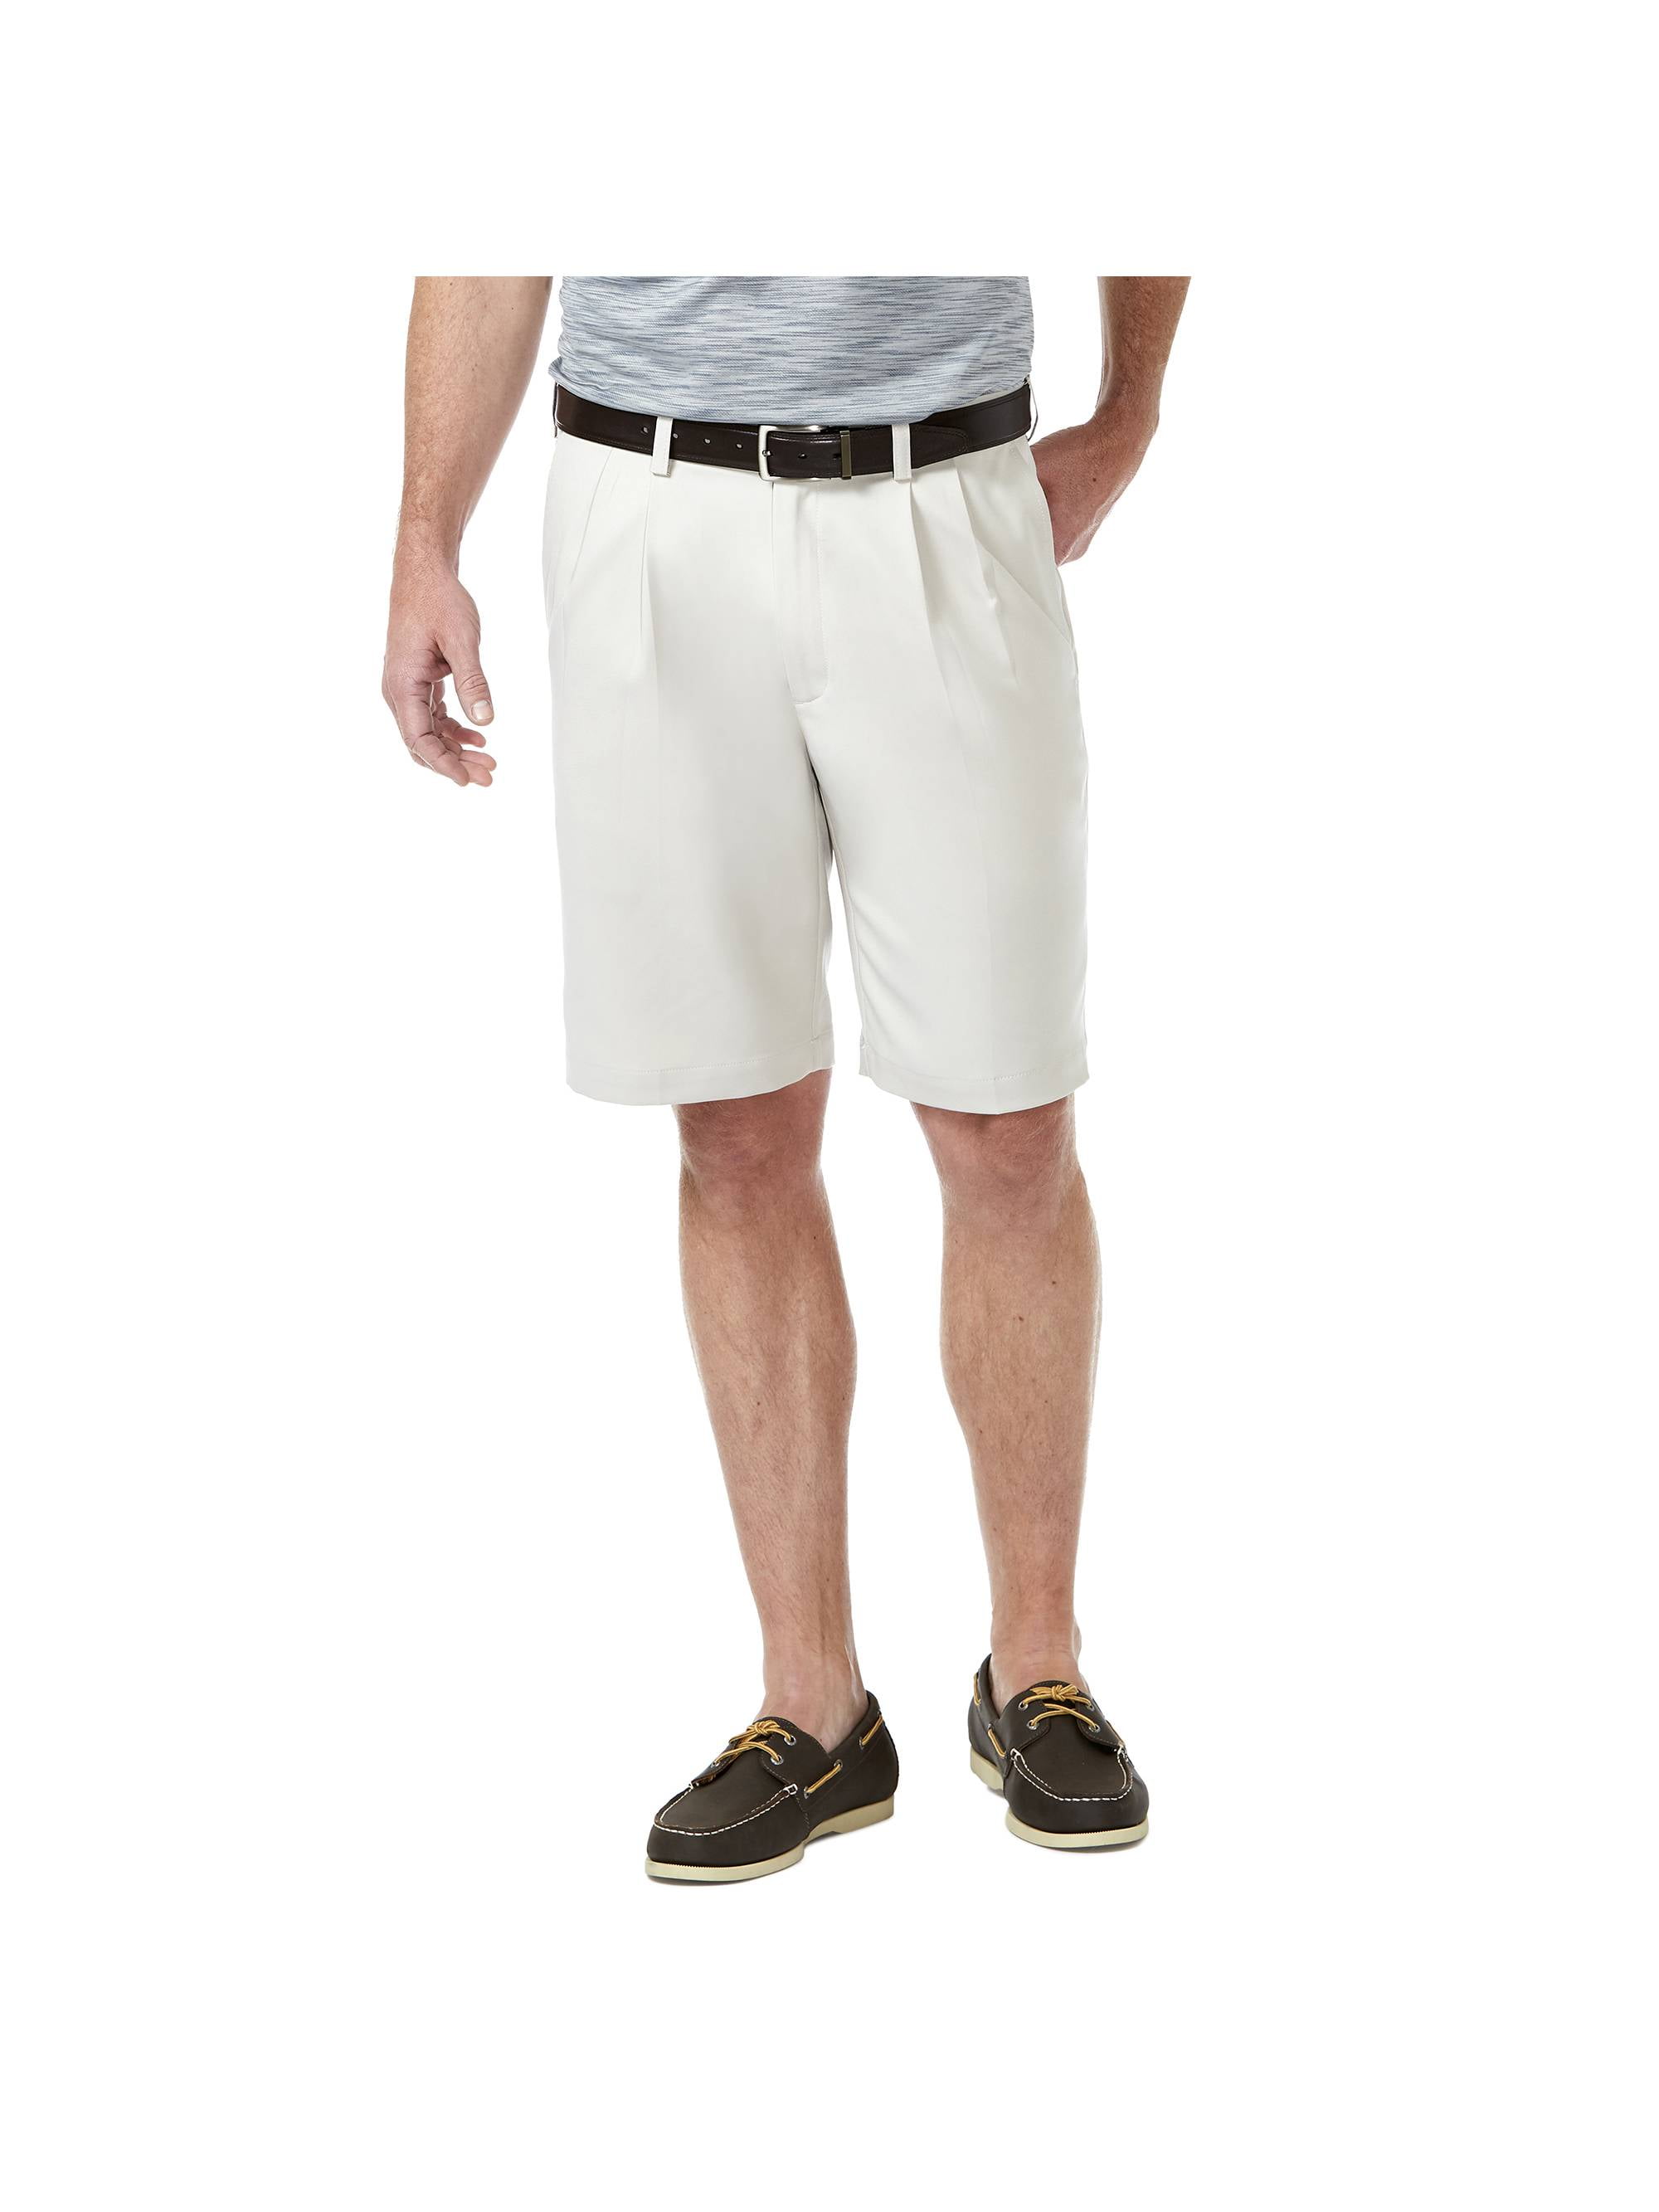 Haggar Mens Cool 18 Pro Pleat Front 4-Way Stretch Expandable Waist Short Regular and Big & Tall Sizes